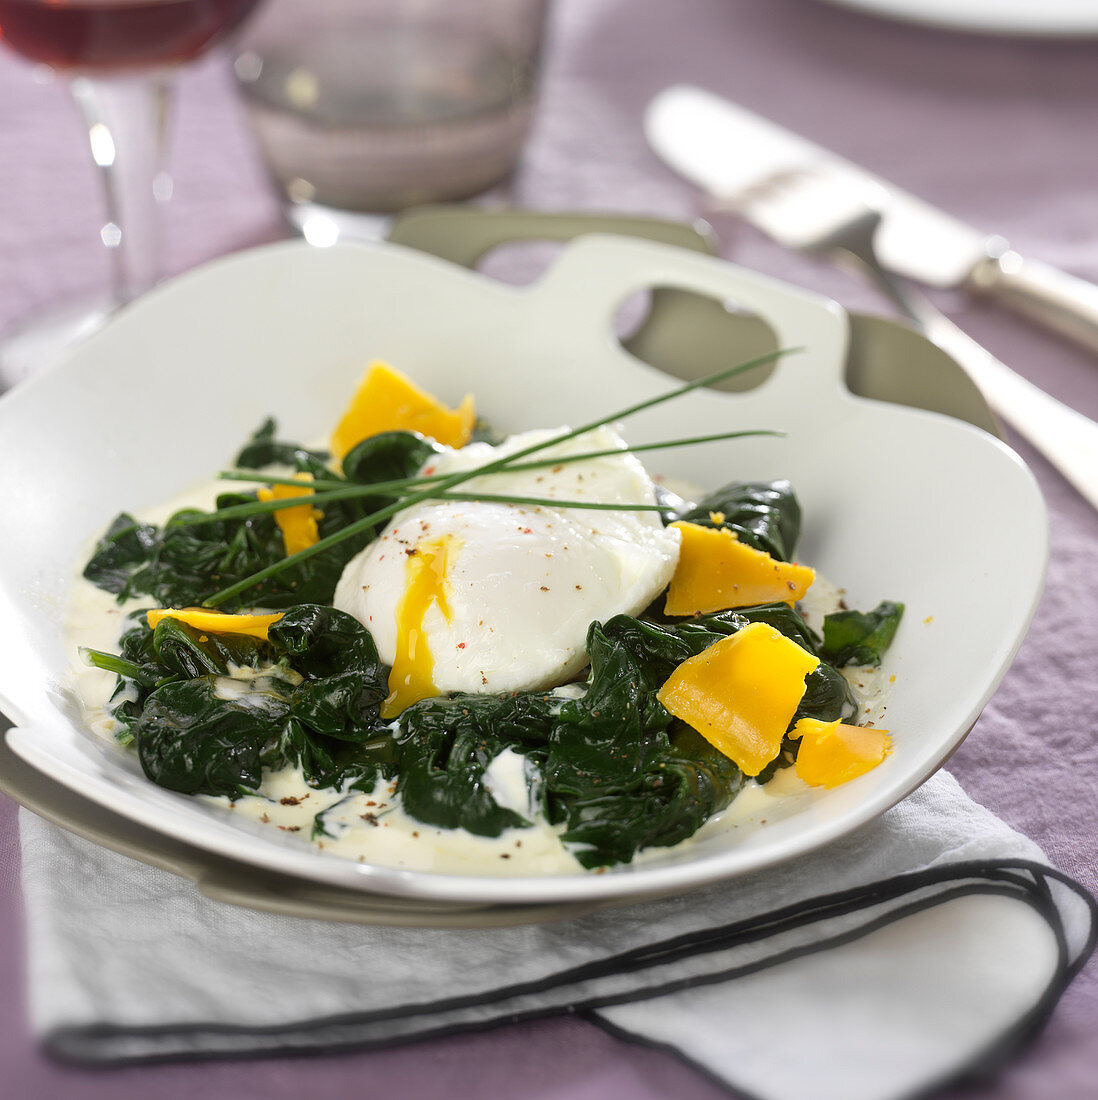 Spinach in creamy sauce, poached egg and mimolette flakes